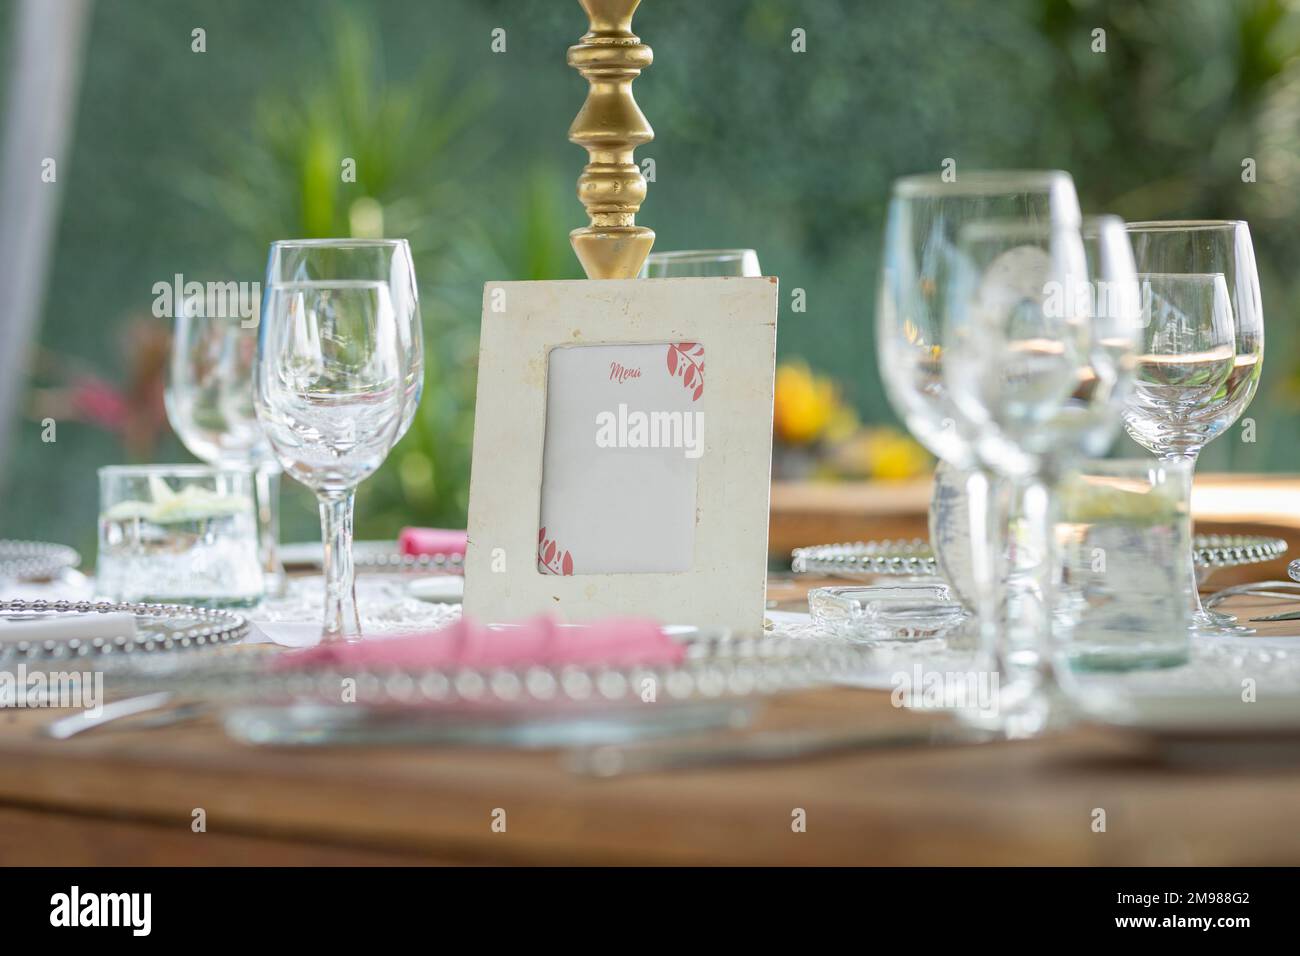 Elegant glassware on a table at a social event, in an outdoor garden Stock Photo